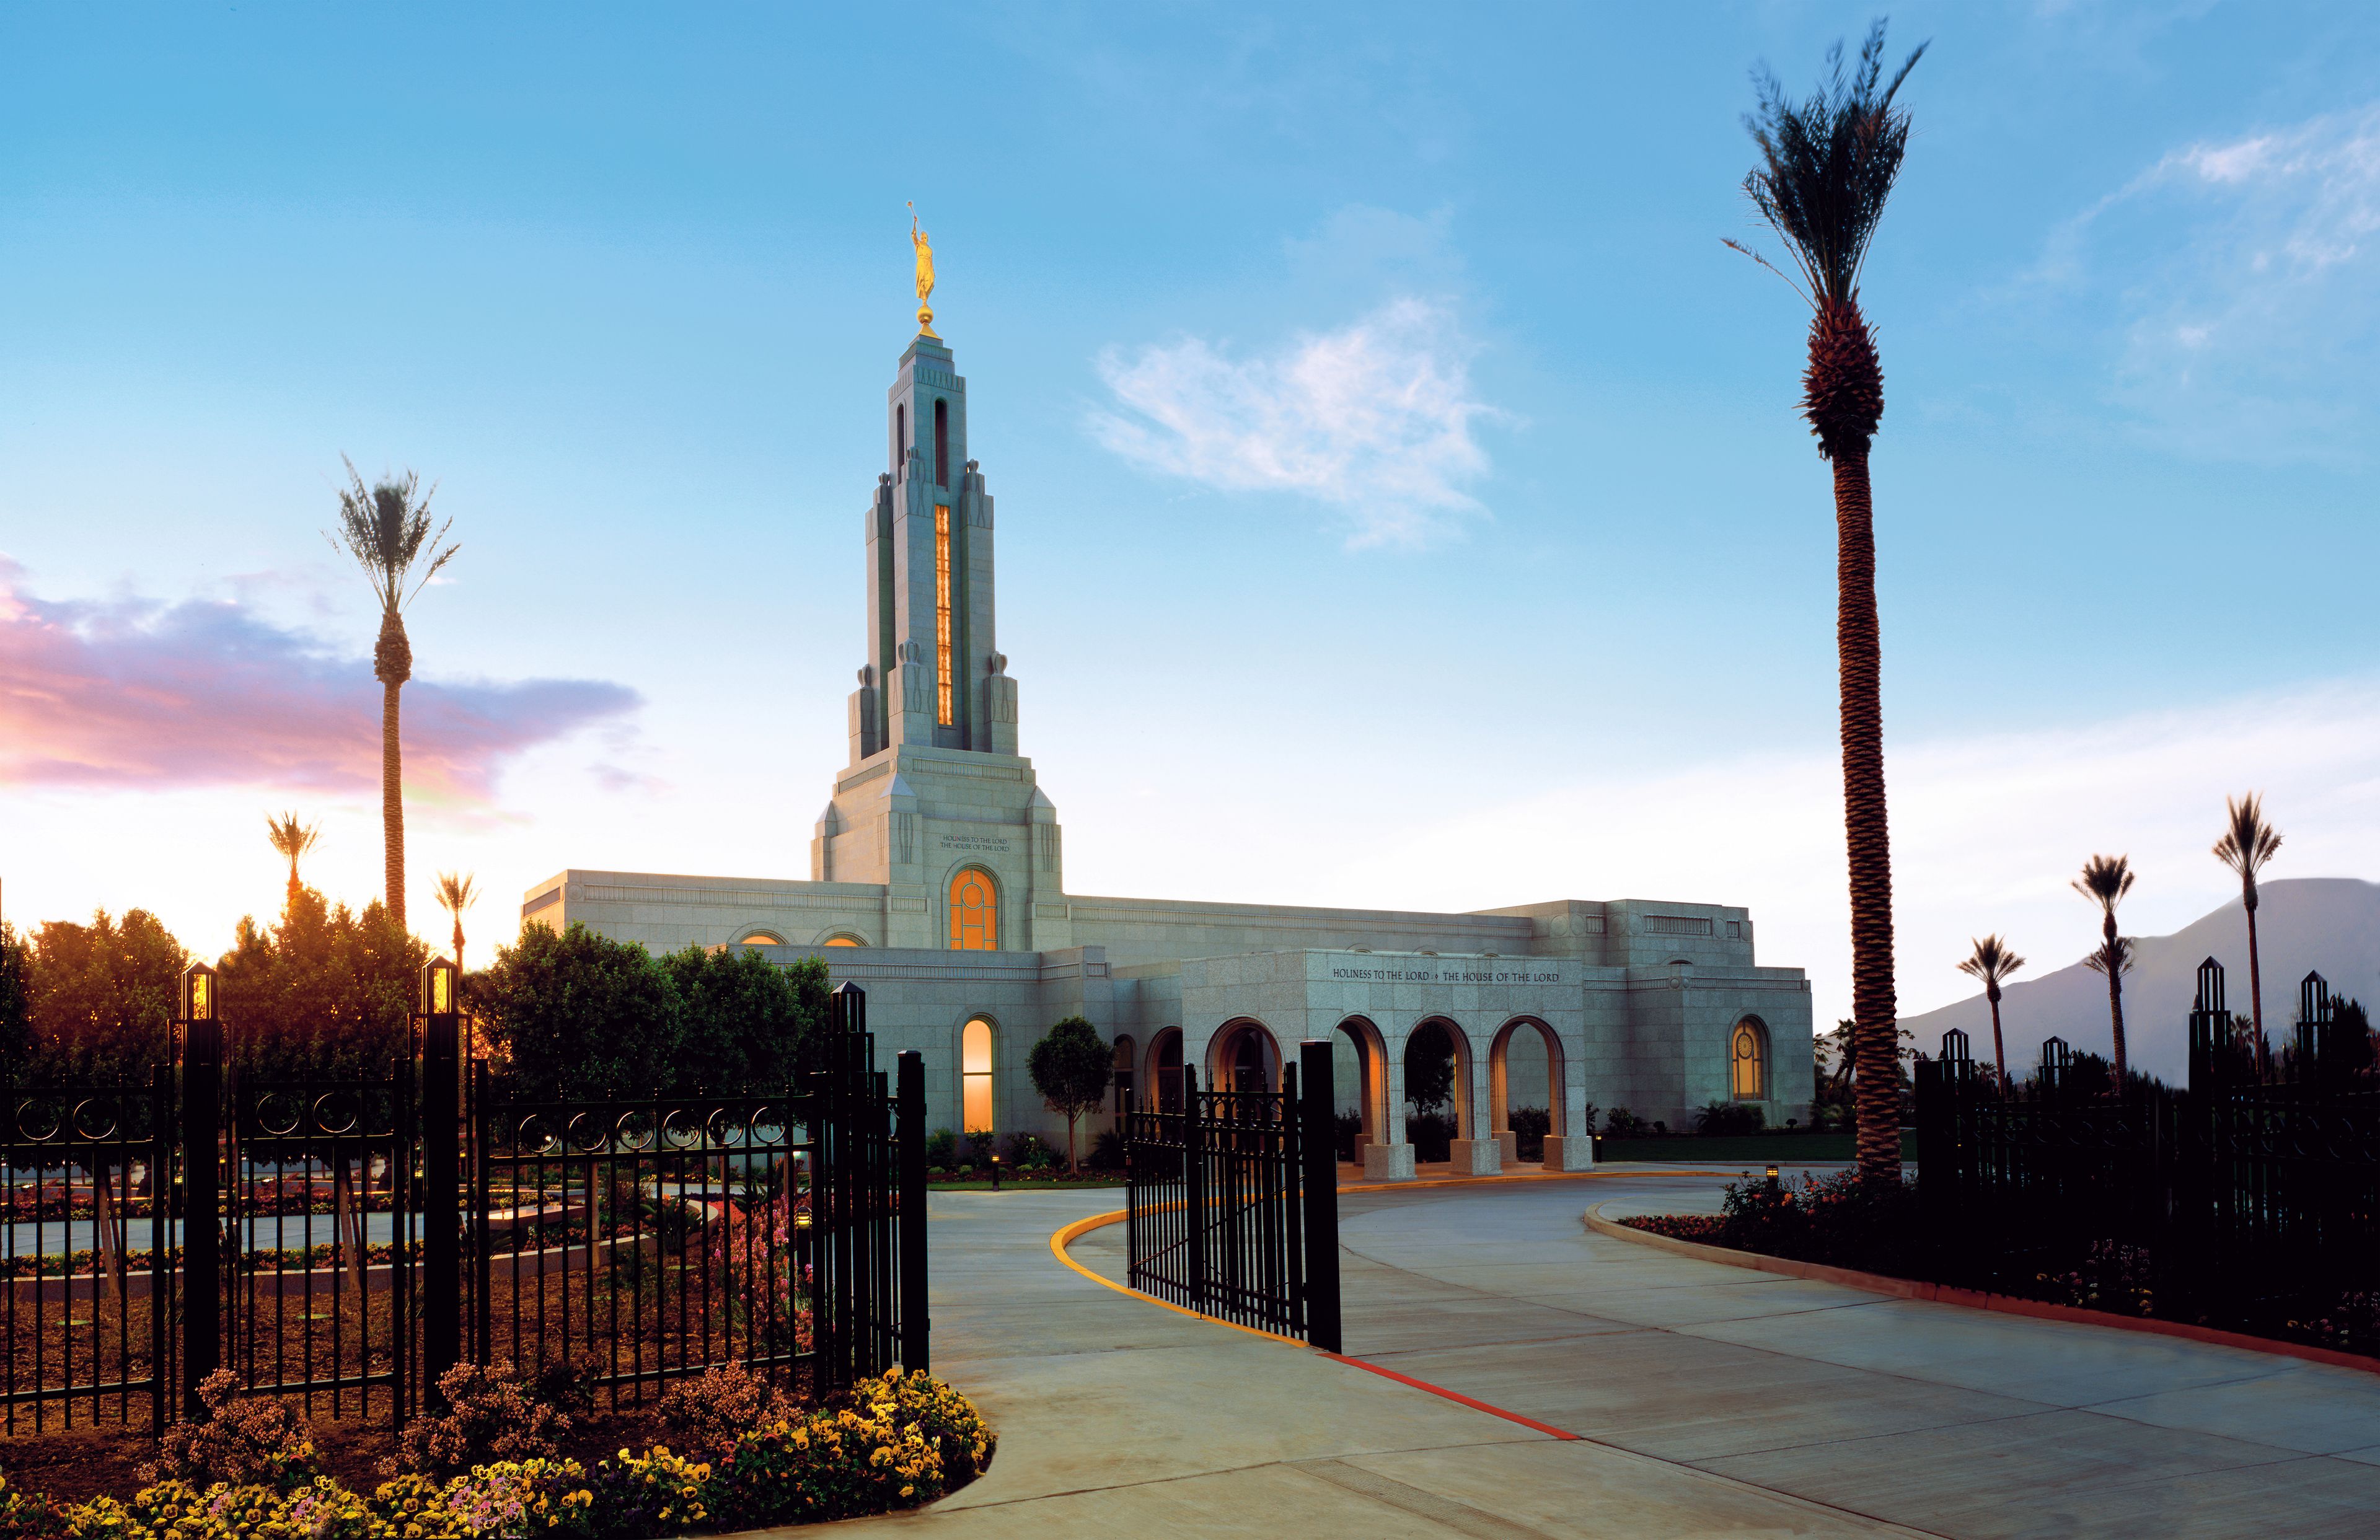 The Redlands California Temple at sunset, including the entrance and scenery.